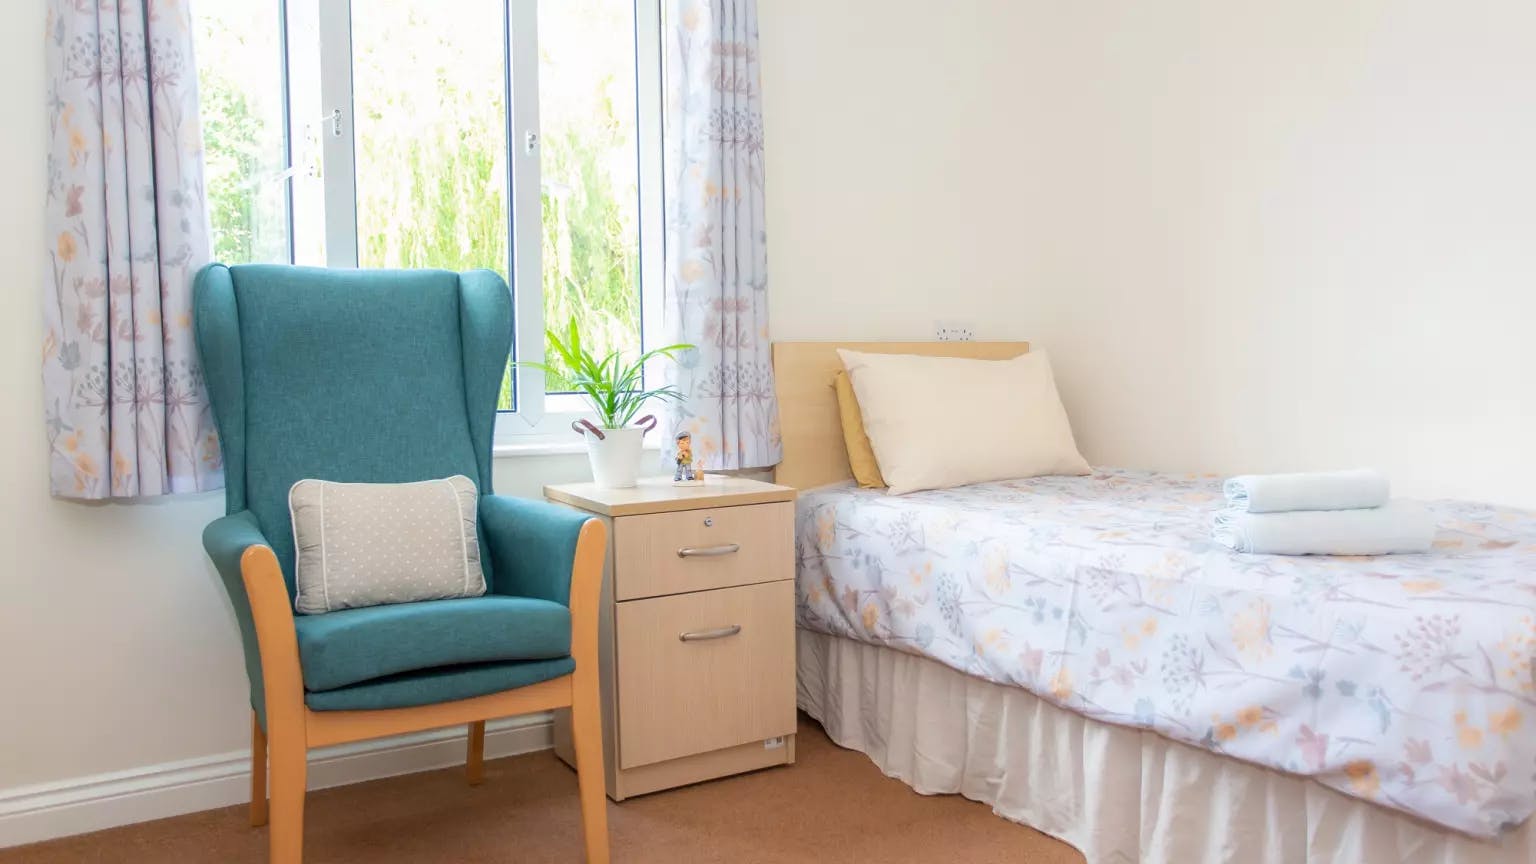 Bedroom of Fosse House care home in St Albans, Hertfordshire